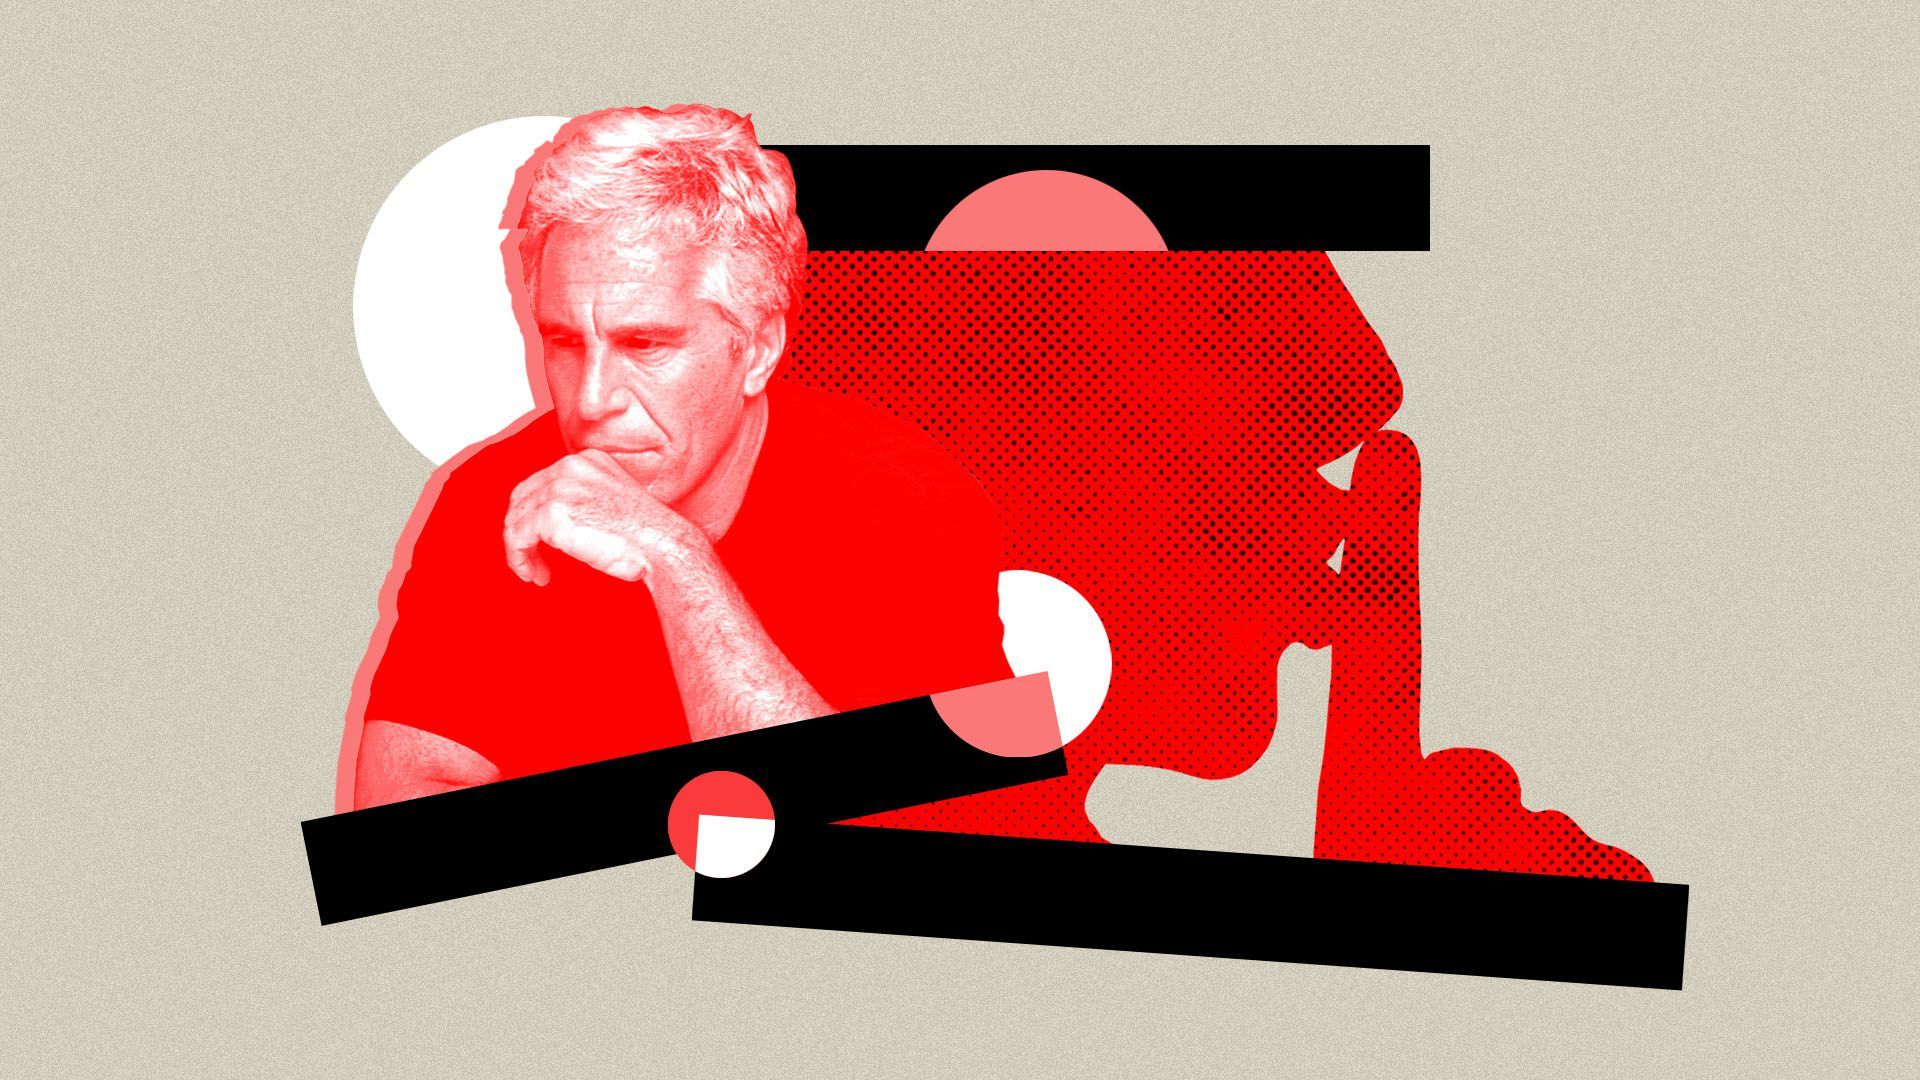 Jeffrey Epstein and a shushing silhouette